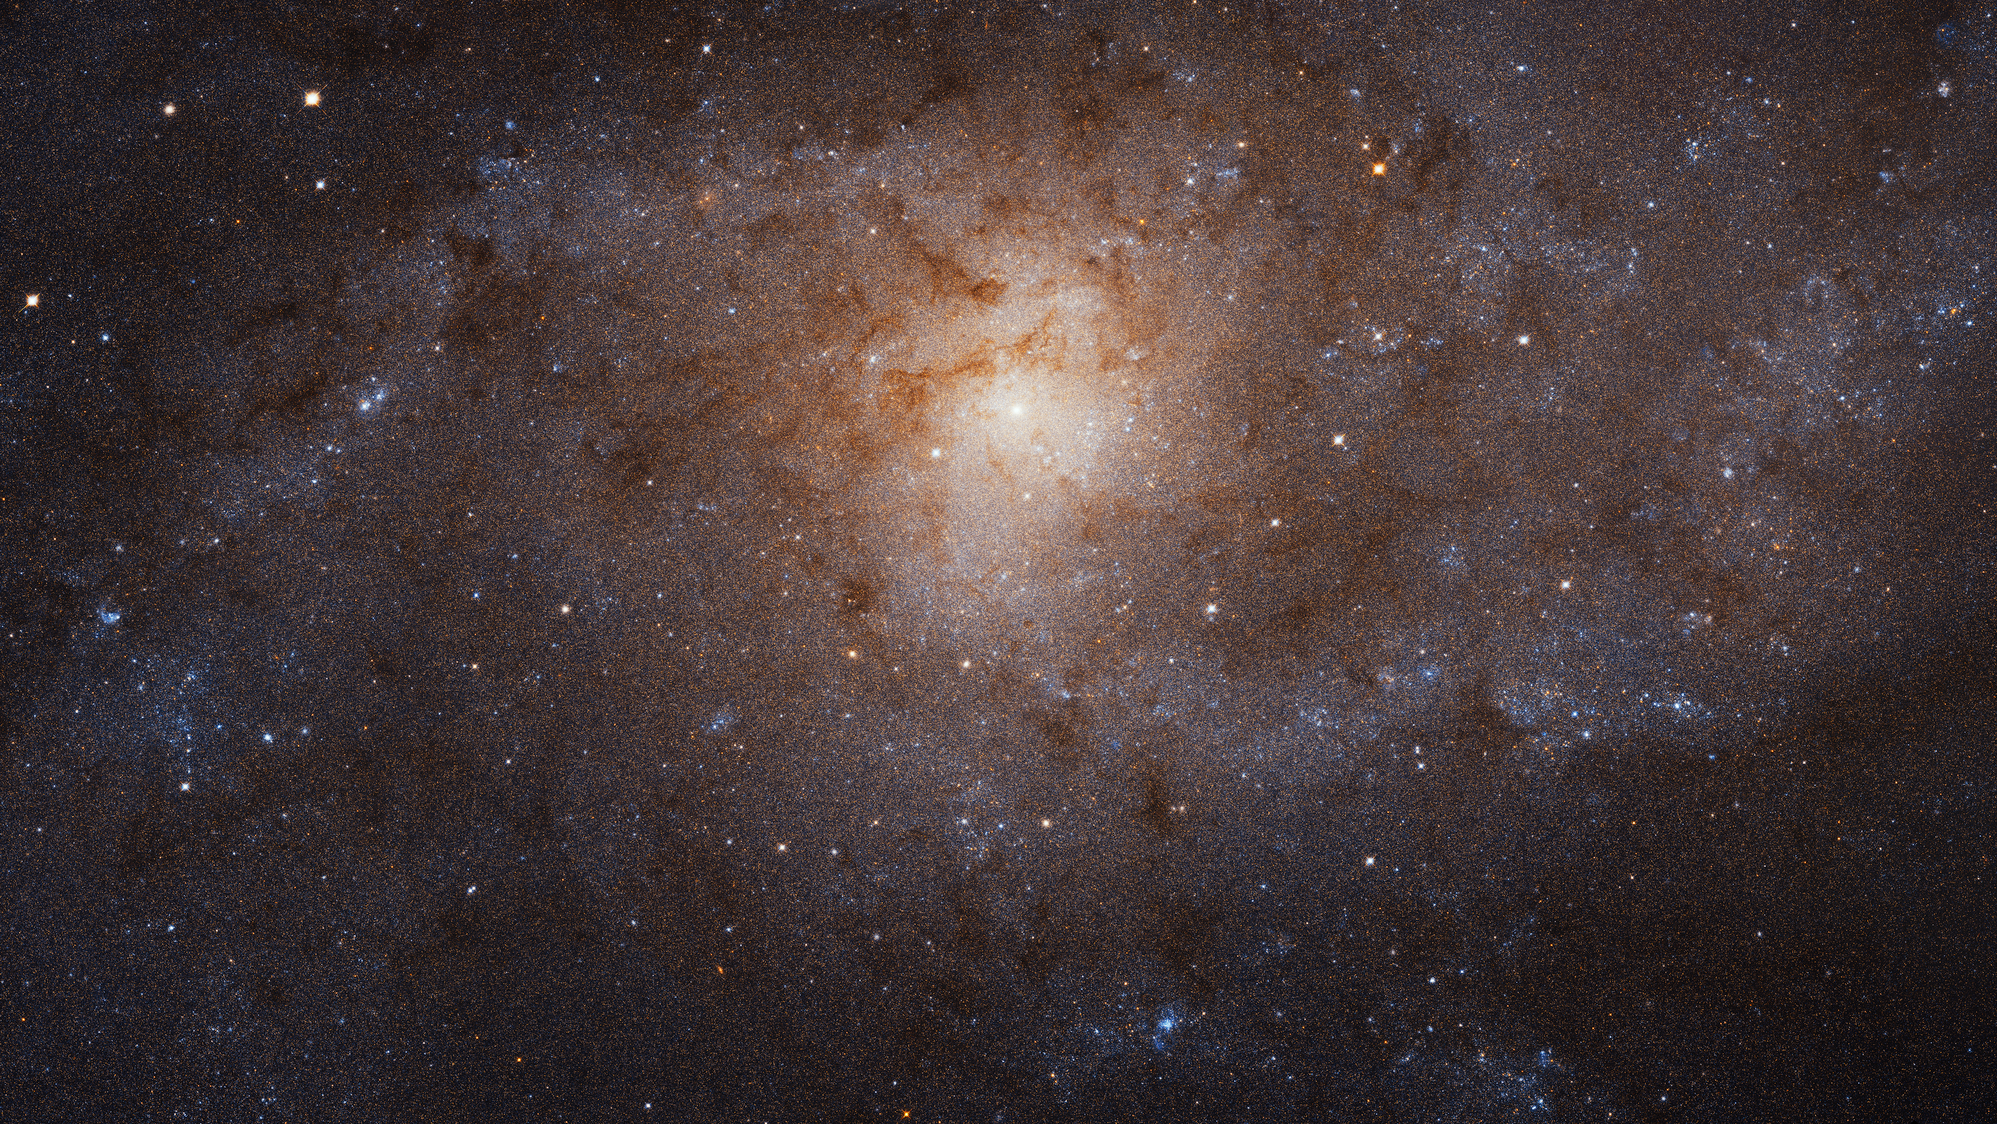 1997x1124 Triangulum Galaxy Shows Stunning Face in Detailed Hubble Portrait | NASA